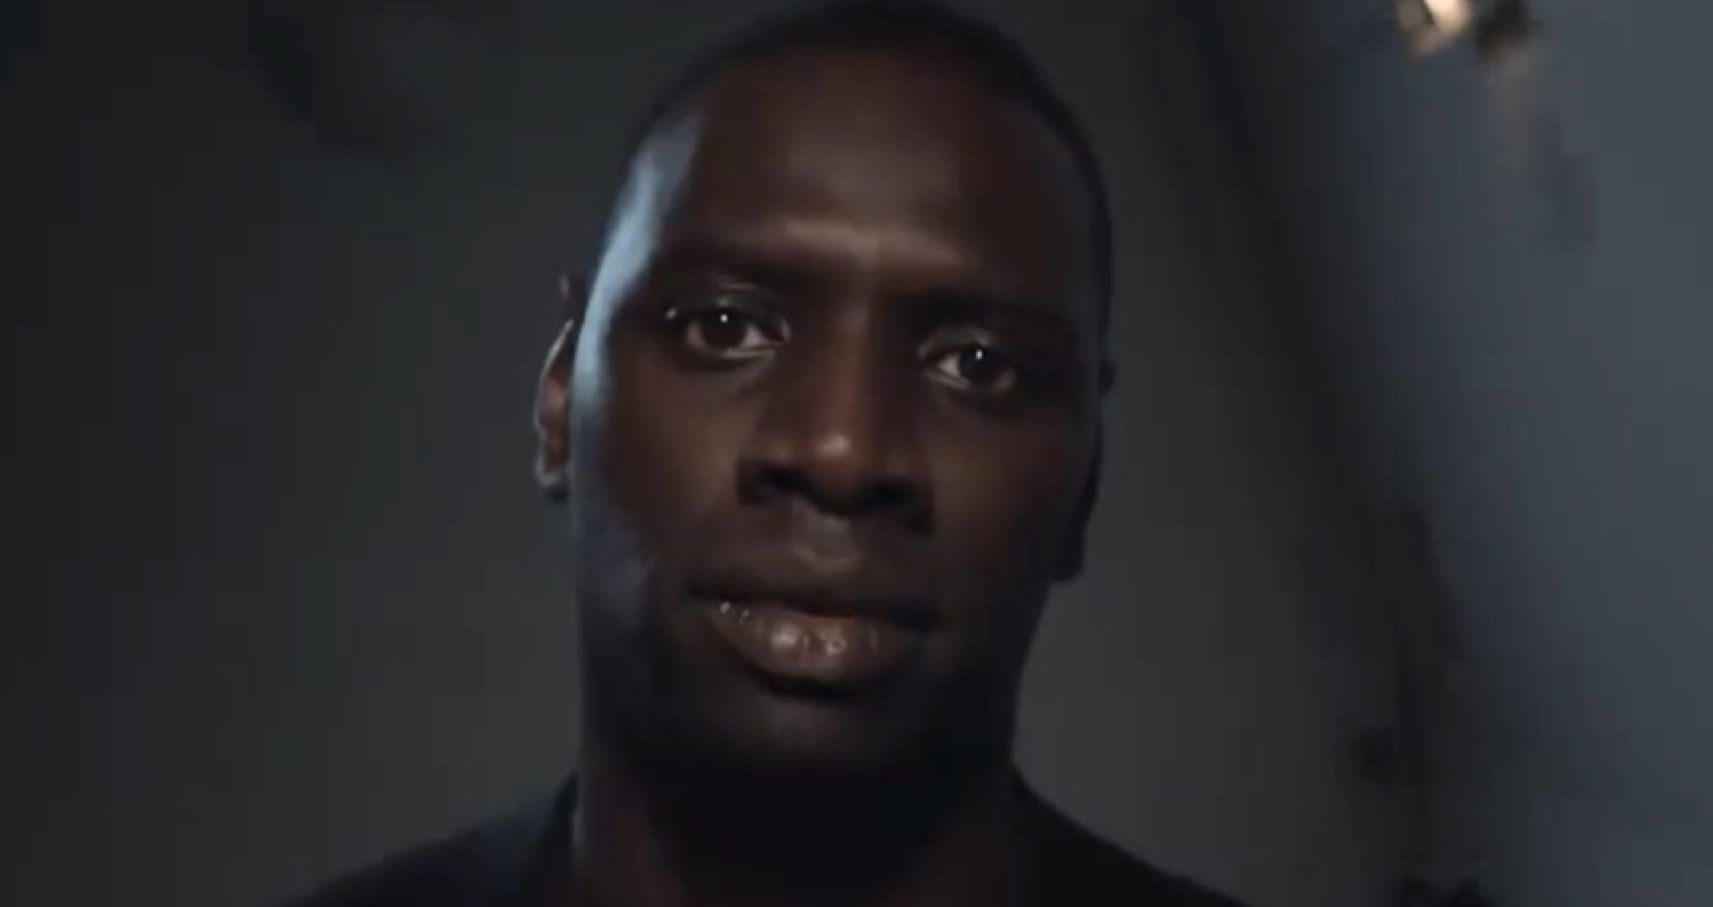 Omar Sy as Assane Diop in the Netflix crime series Lupin